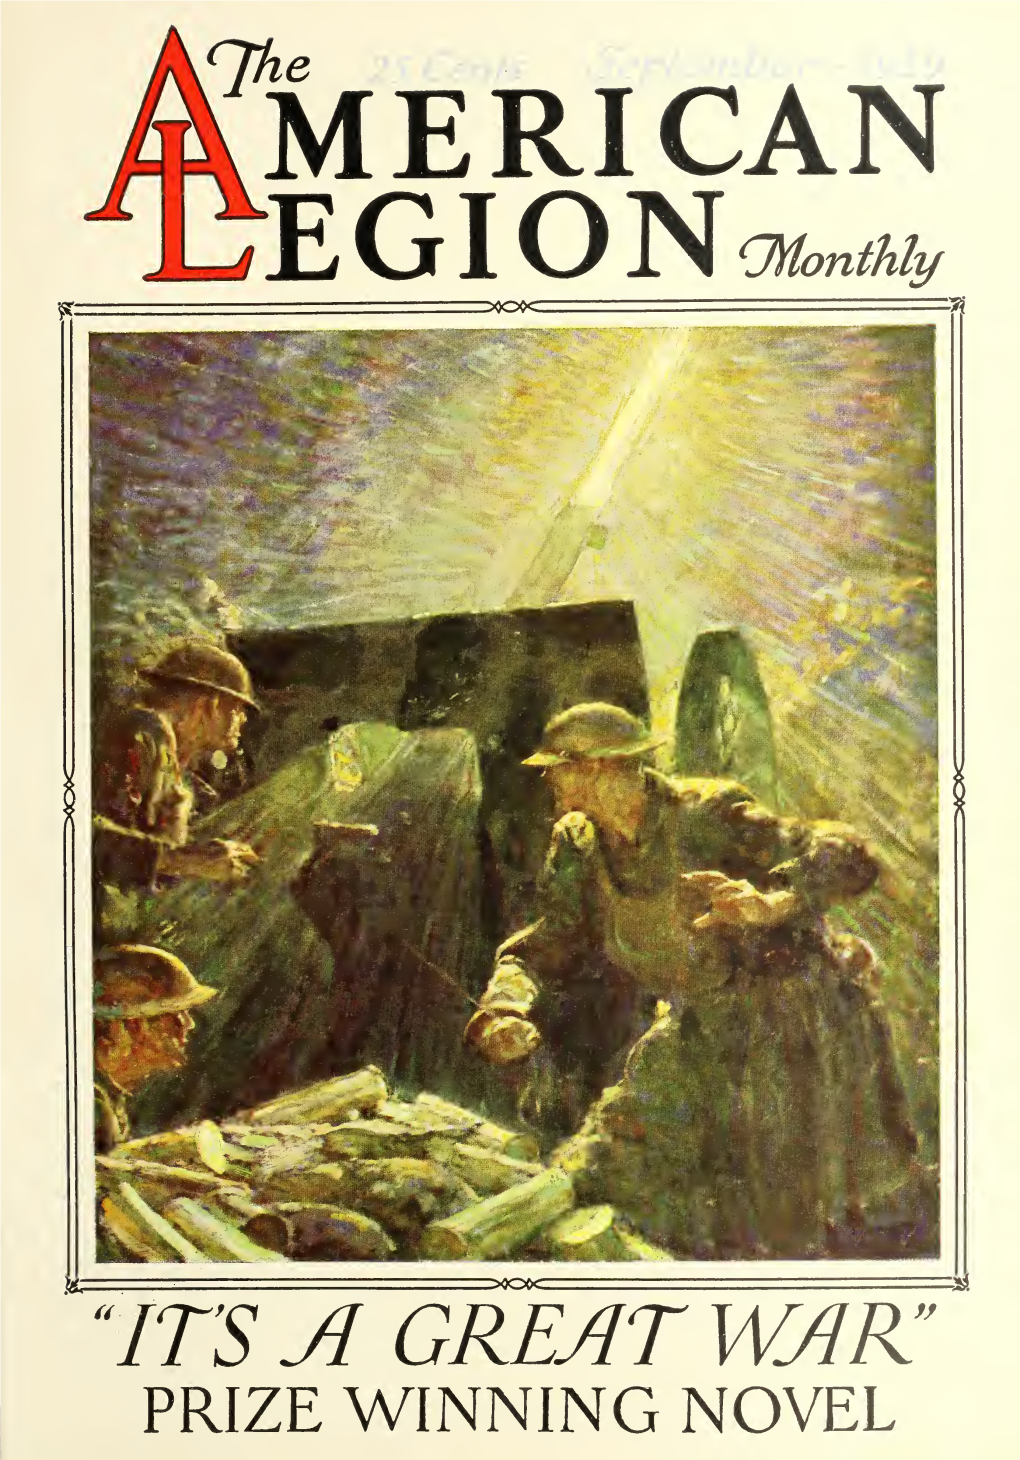 The AMERICAN LEGION Monthly